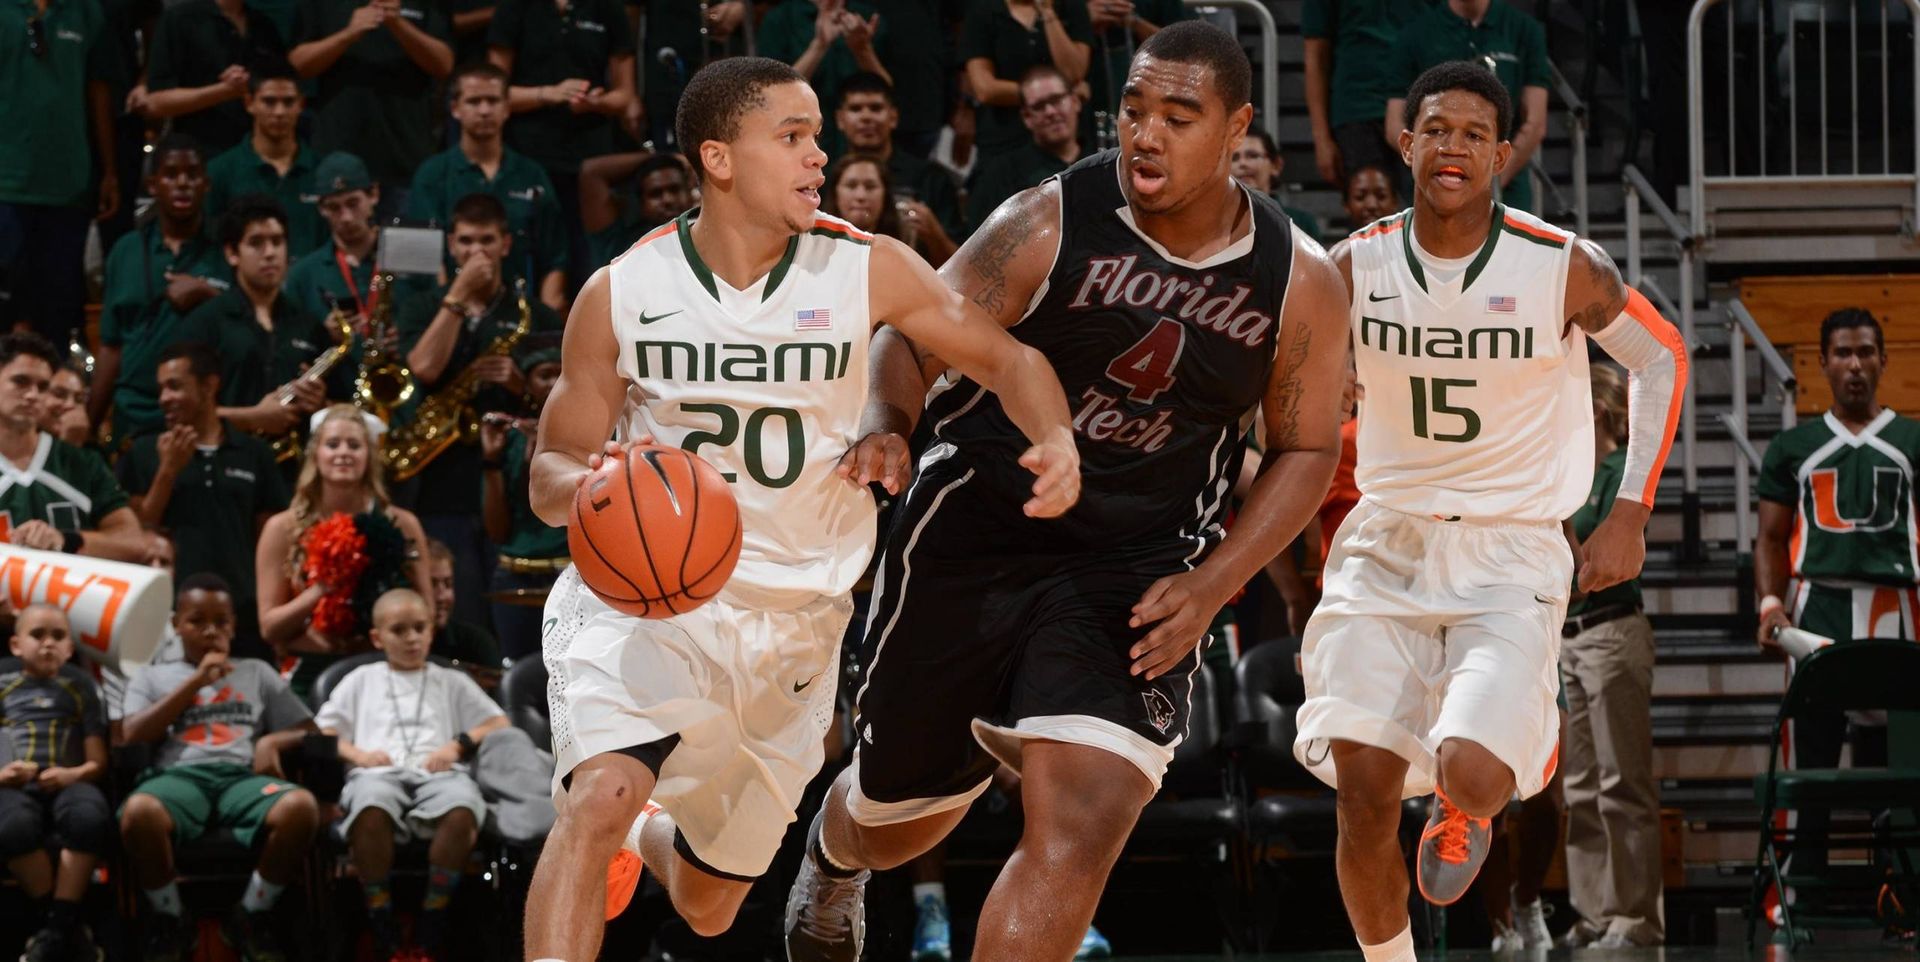 Canes Stifle Tech In Exhibition Opener